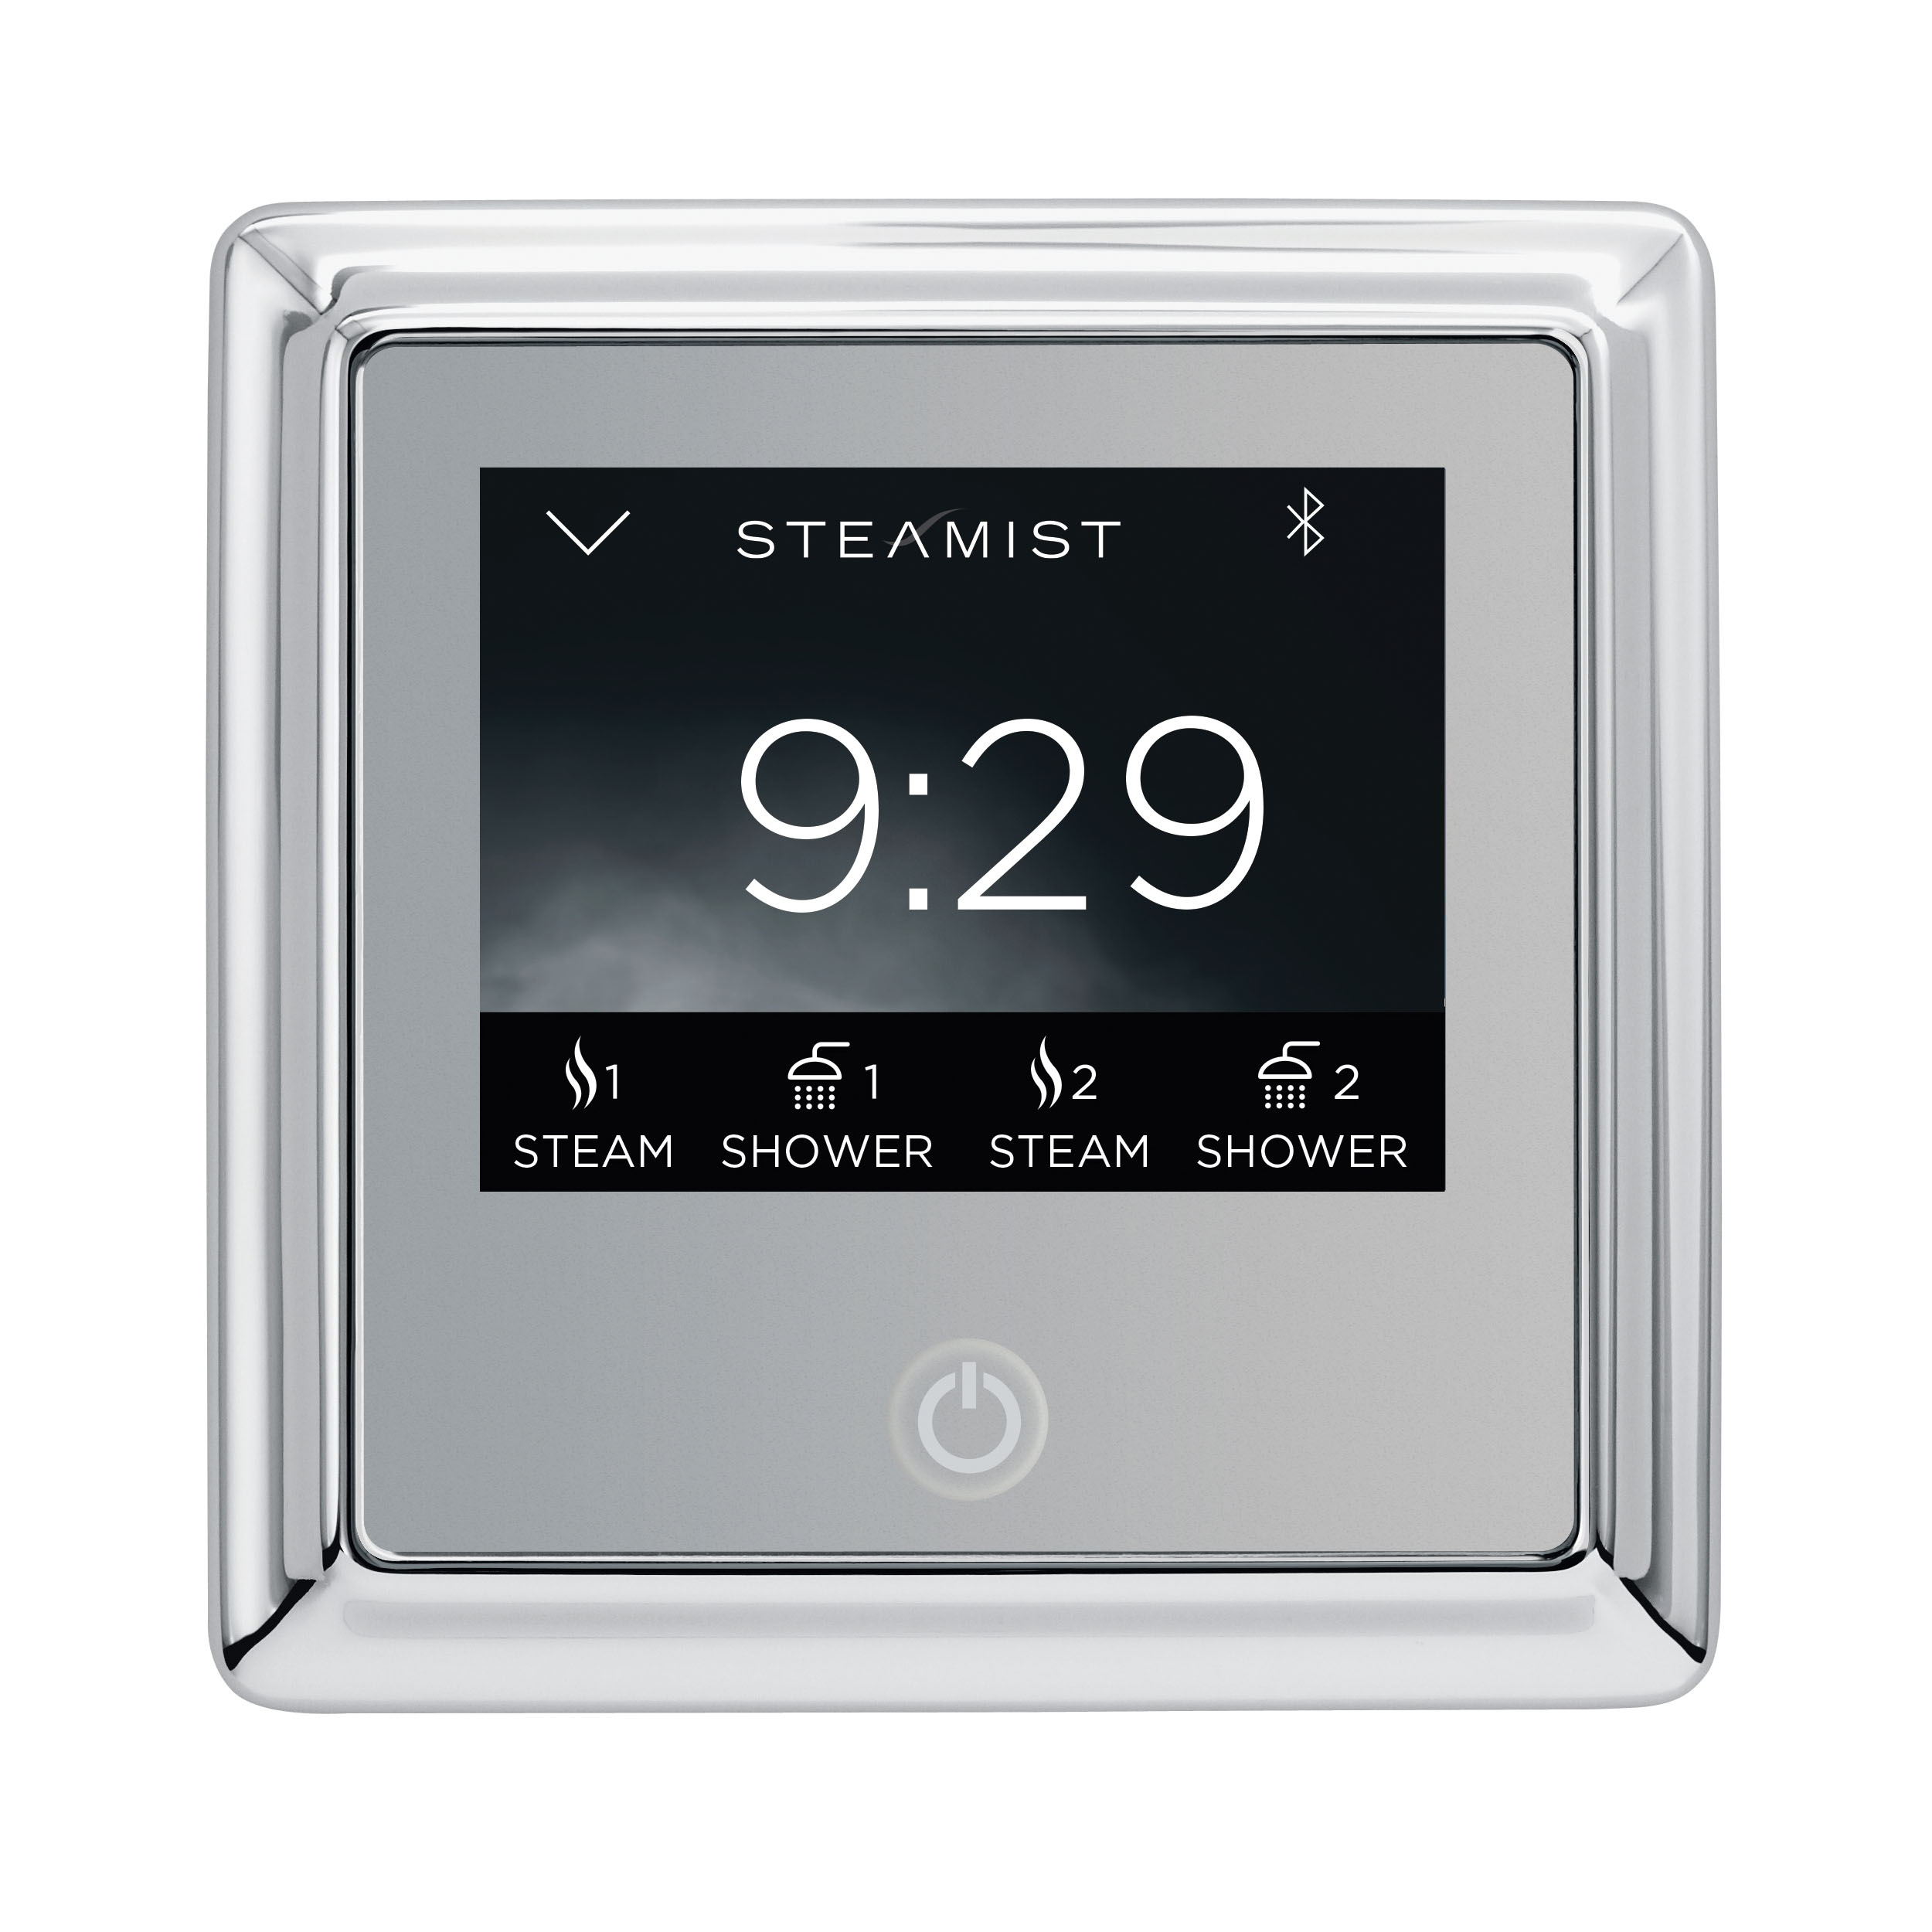 Steamist® 450T-BN TSC-450T Traditional Steambath Control With Wi-Fi, Total Sense™, Digital Display, 50 to 125 deg F, Brushed Nickel, For Use With: Model TSG Steam Generator, Domestic